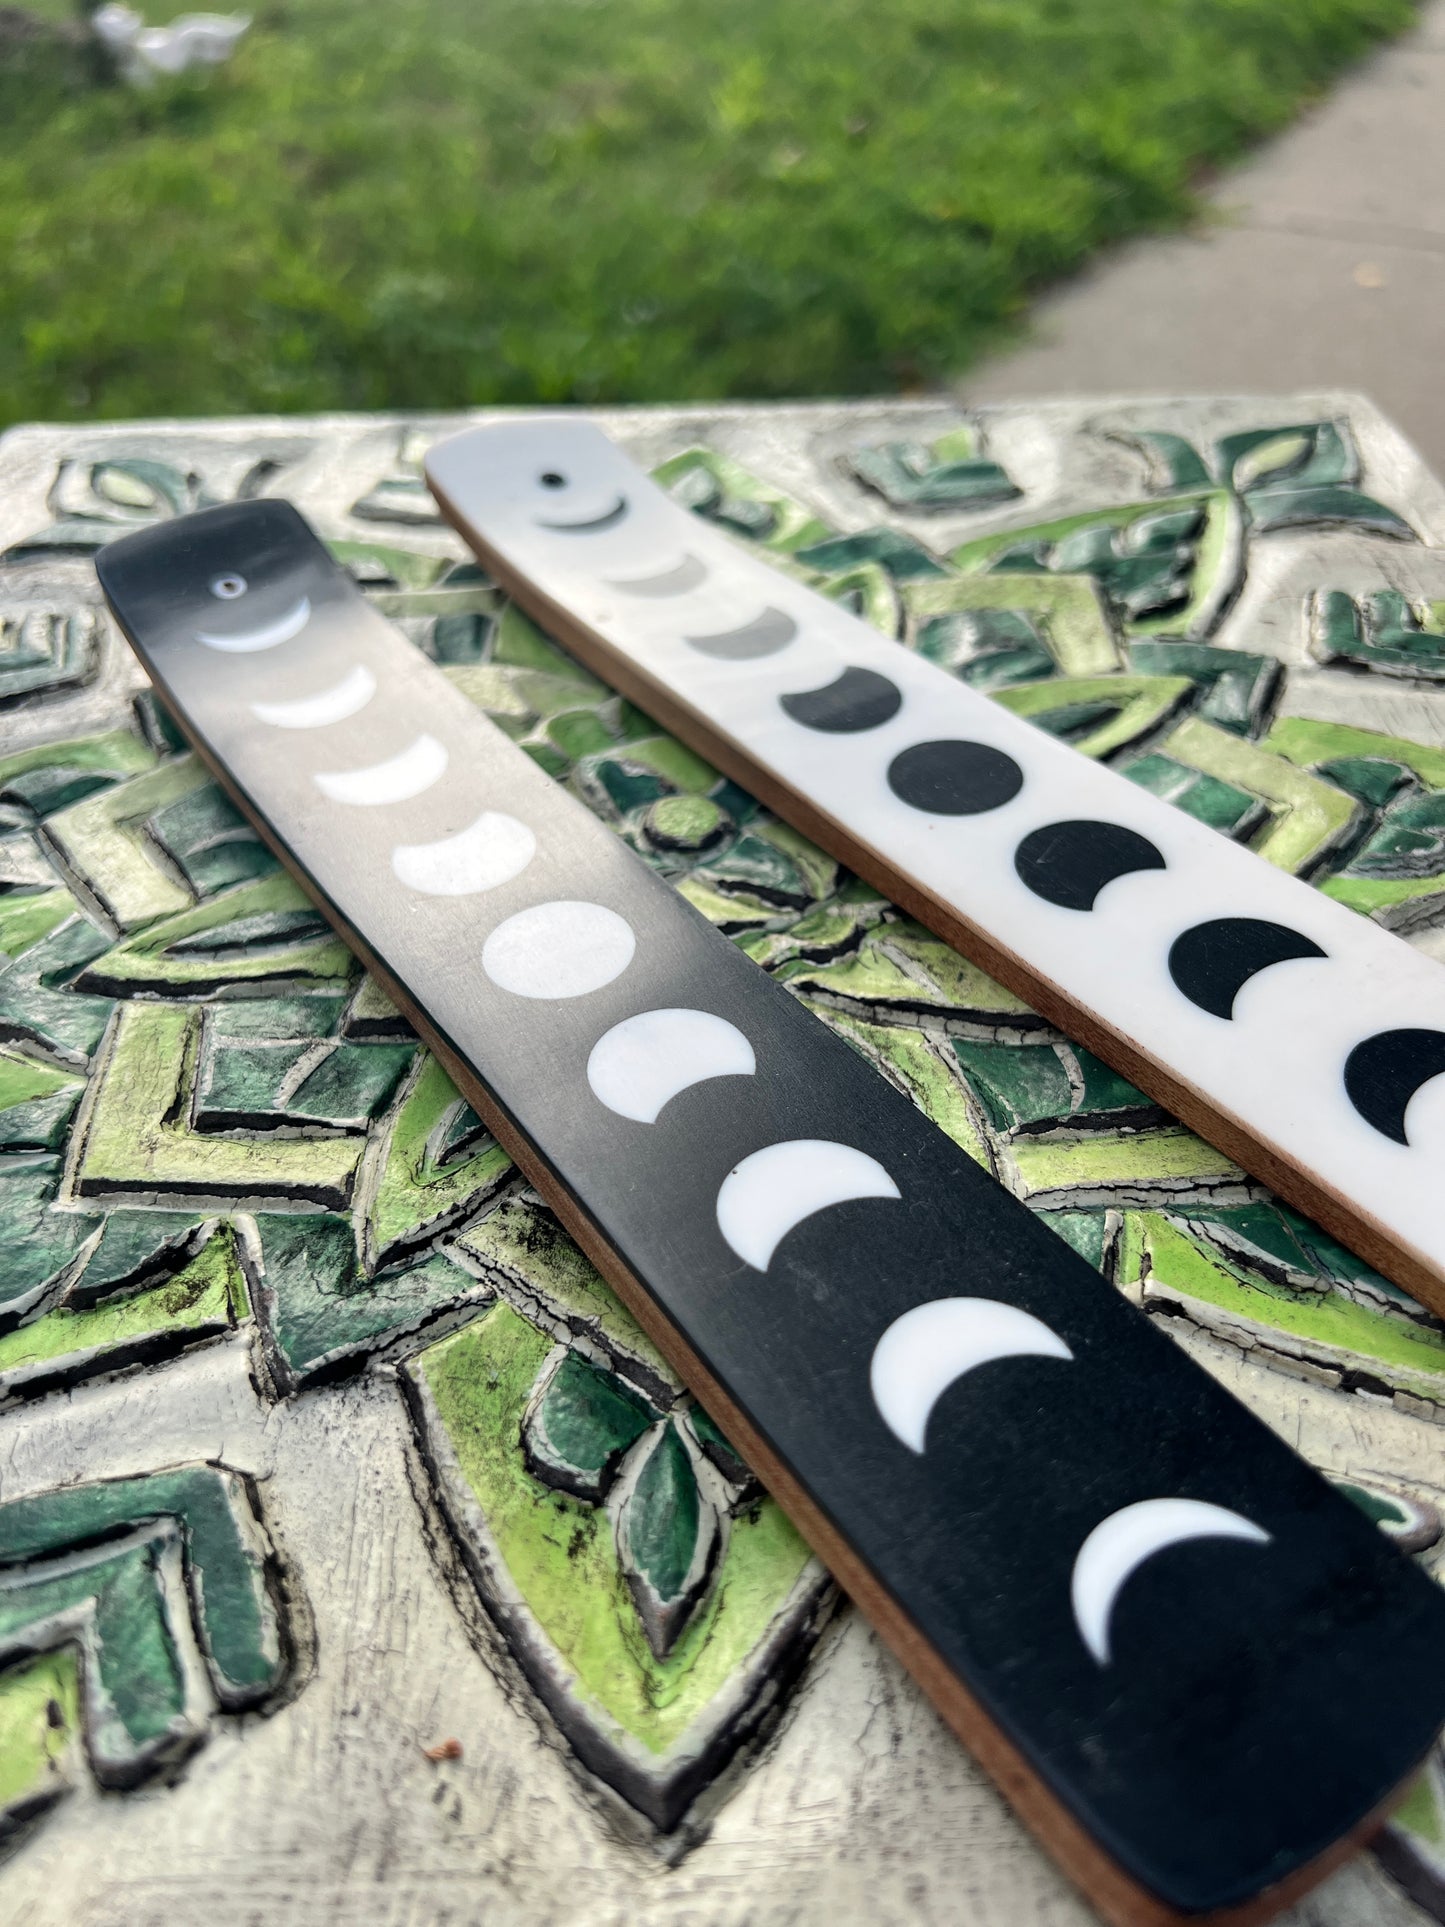 Moon Phases Incense Holder